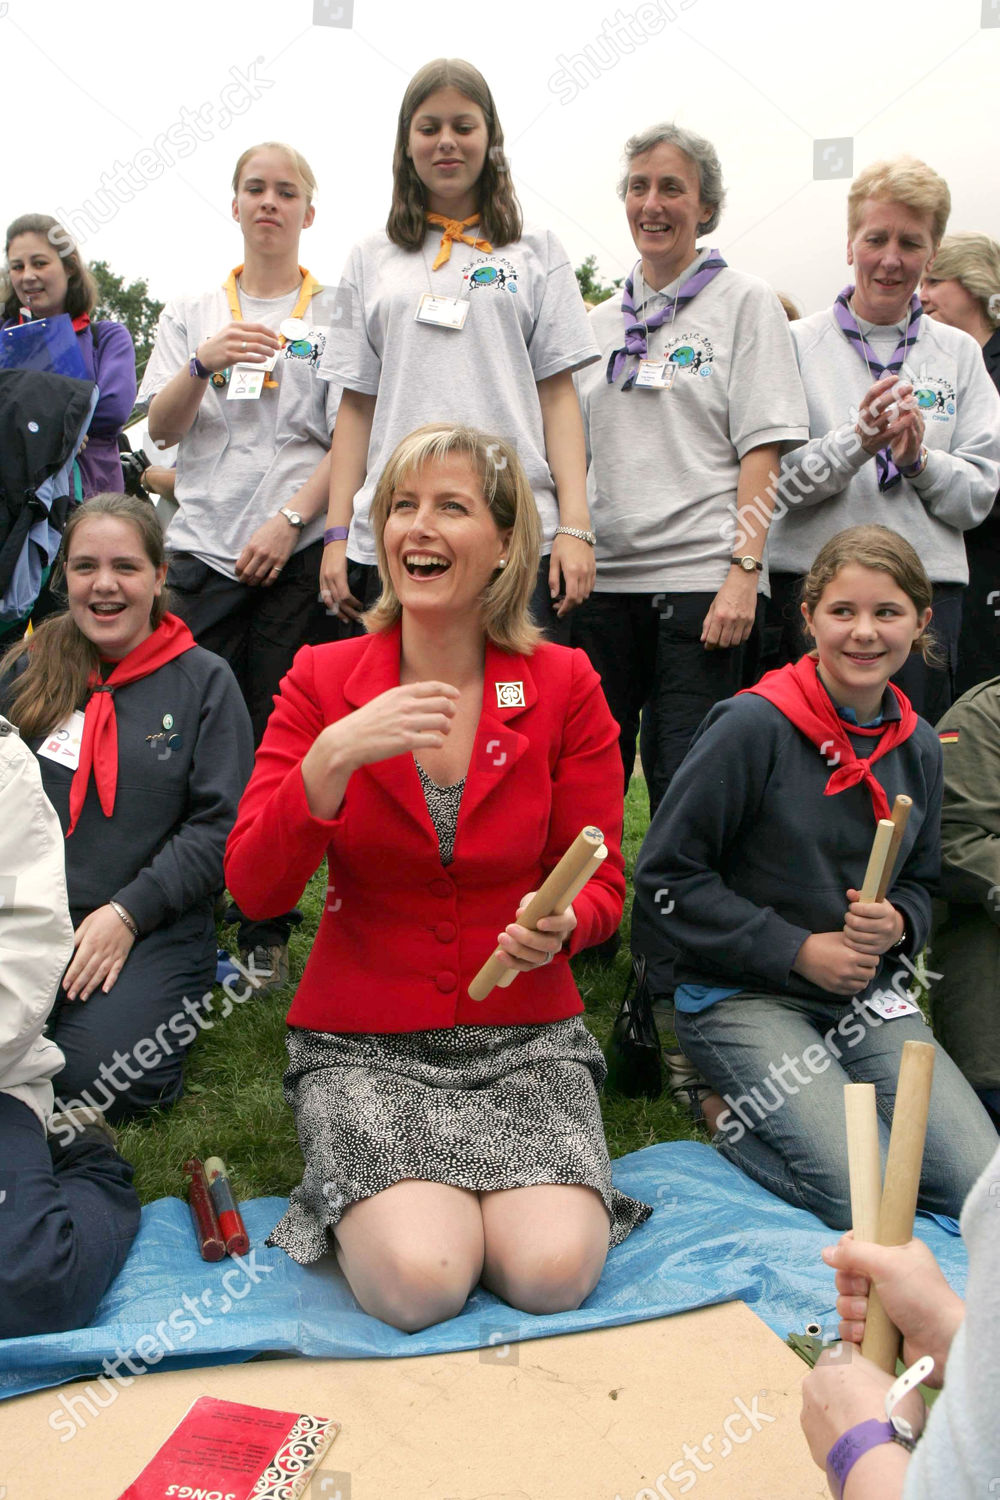 sophie-countess-of-wessex-at-the-guides-magic-camp-beaudesert-park-cannock-wood-britain-shutterstock-editorial-462008f.jpg